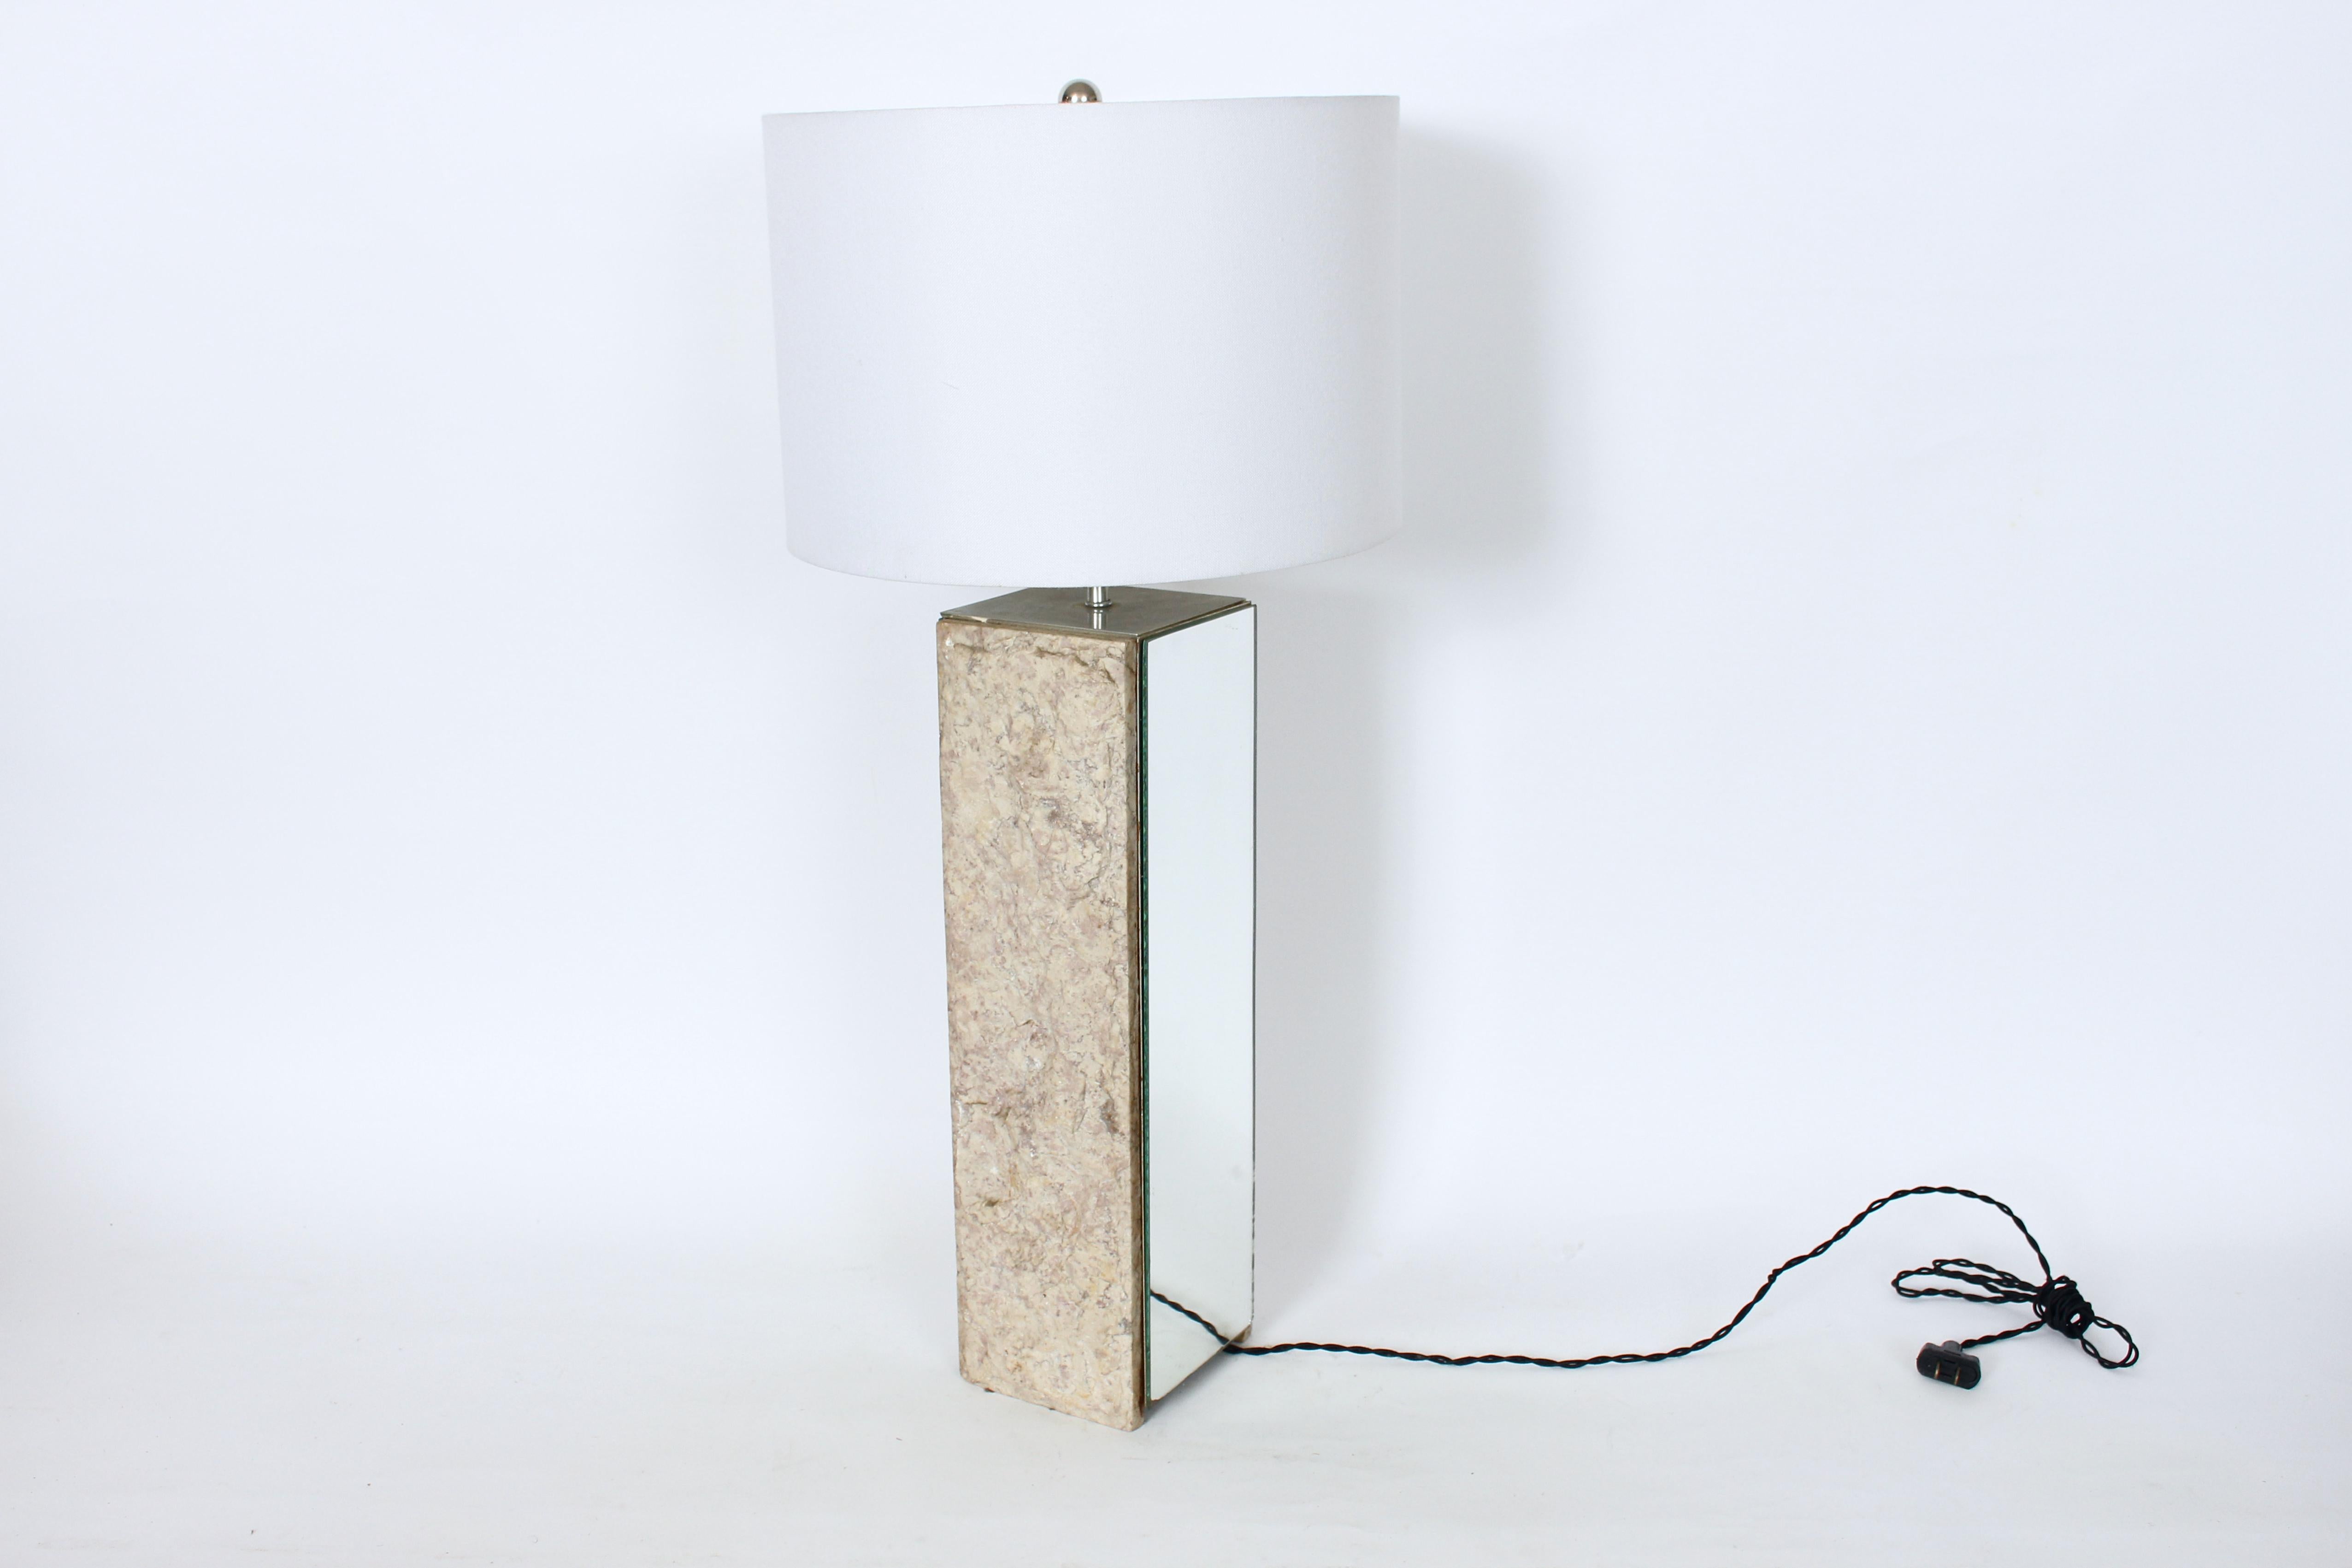 Mid Century Laurel Lamp Co. Rough Cut Beige Marble & Mirror Table Lamp.  Featuring two sided vertical Travertine in Cream, Beige, Taupe with hints of Red, and two sided attached, reflective (18.5H x 5D) Mirrored Panels. 24H to top of socket. 19H to